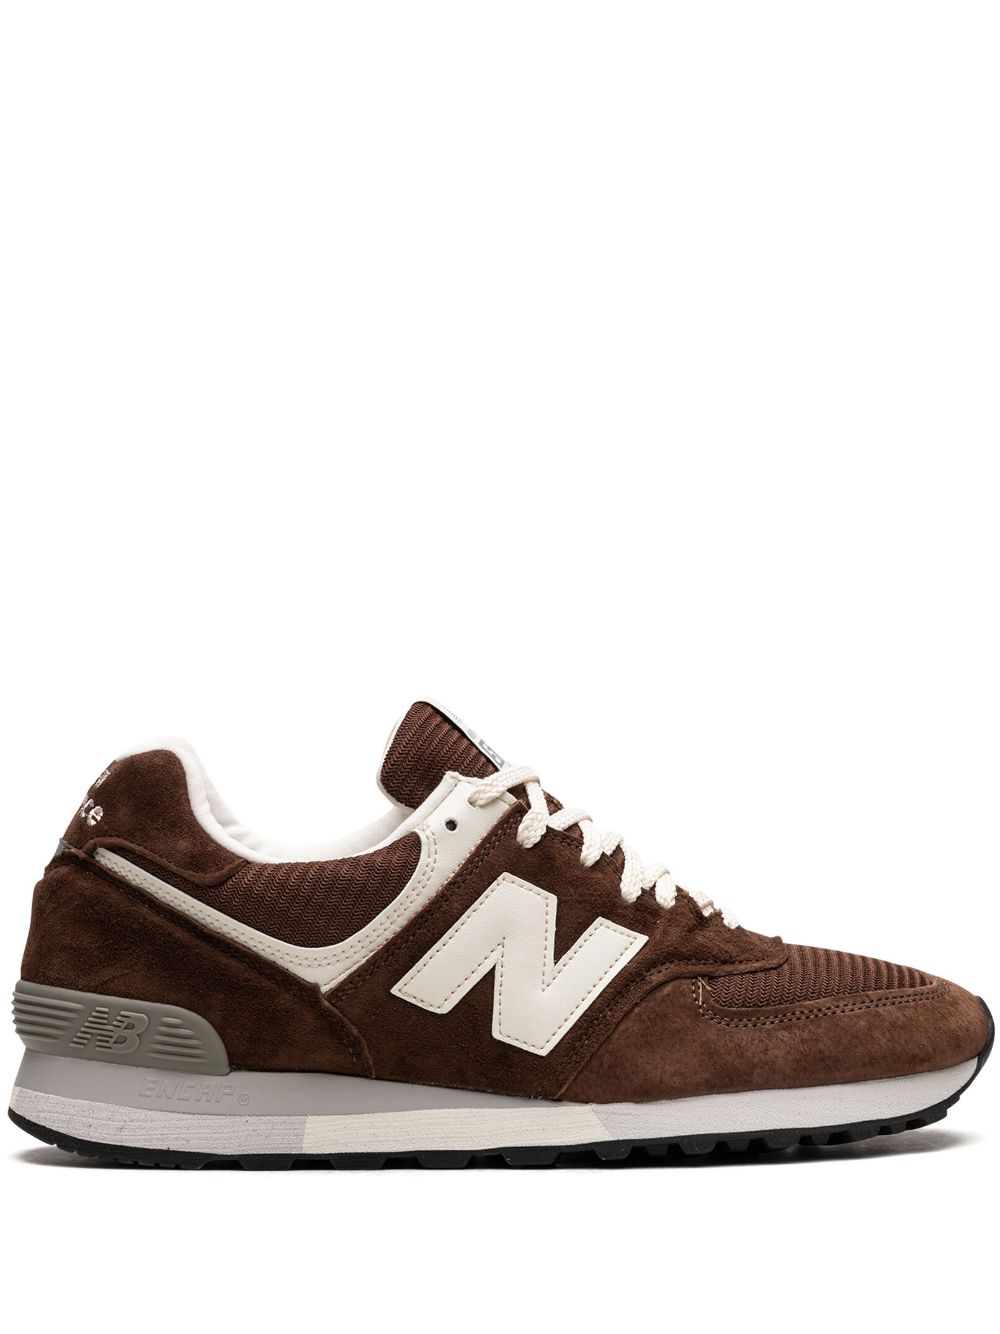 New Balance Made in UK 576 sneakers - Brown